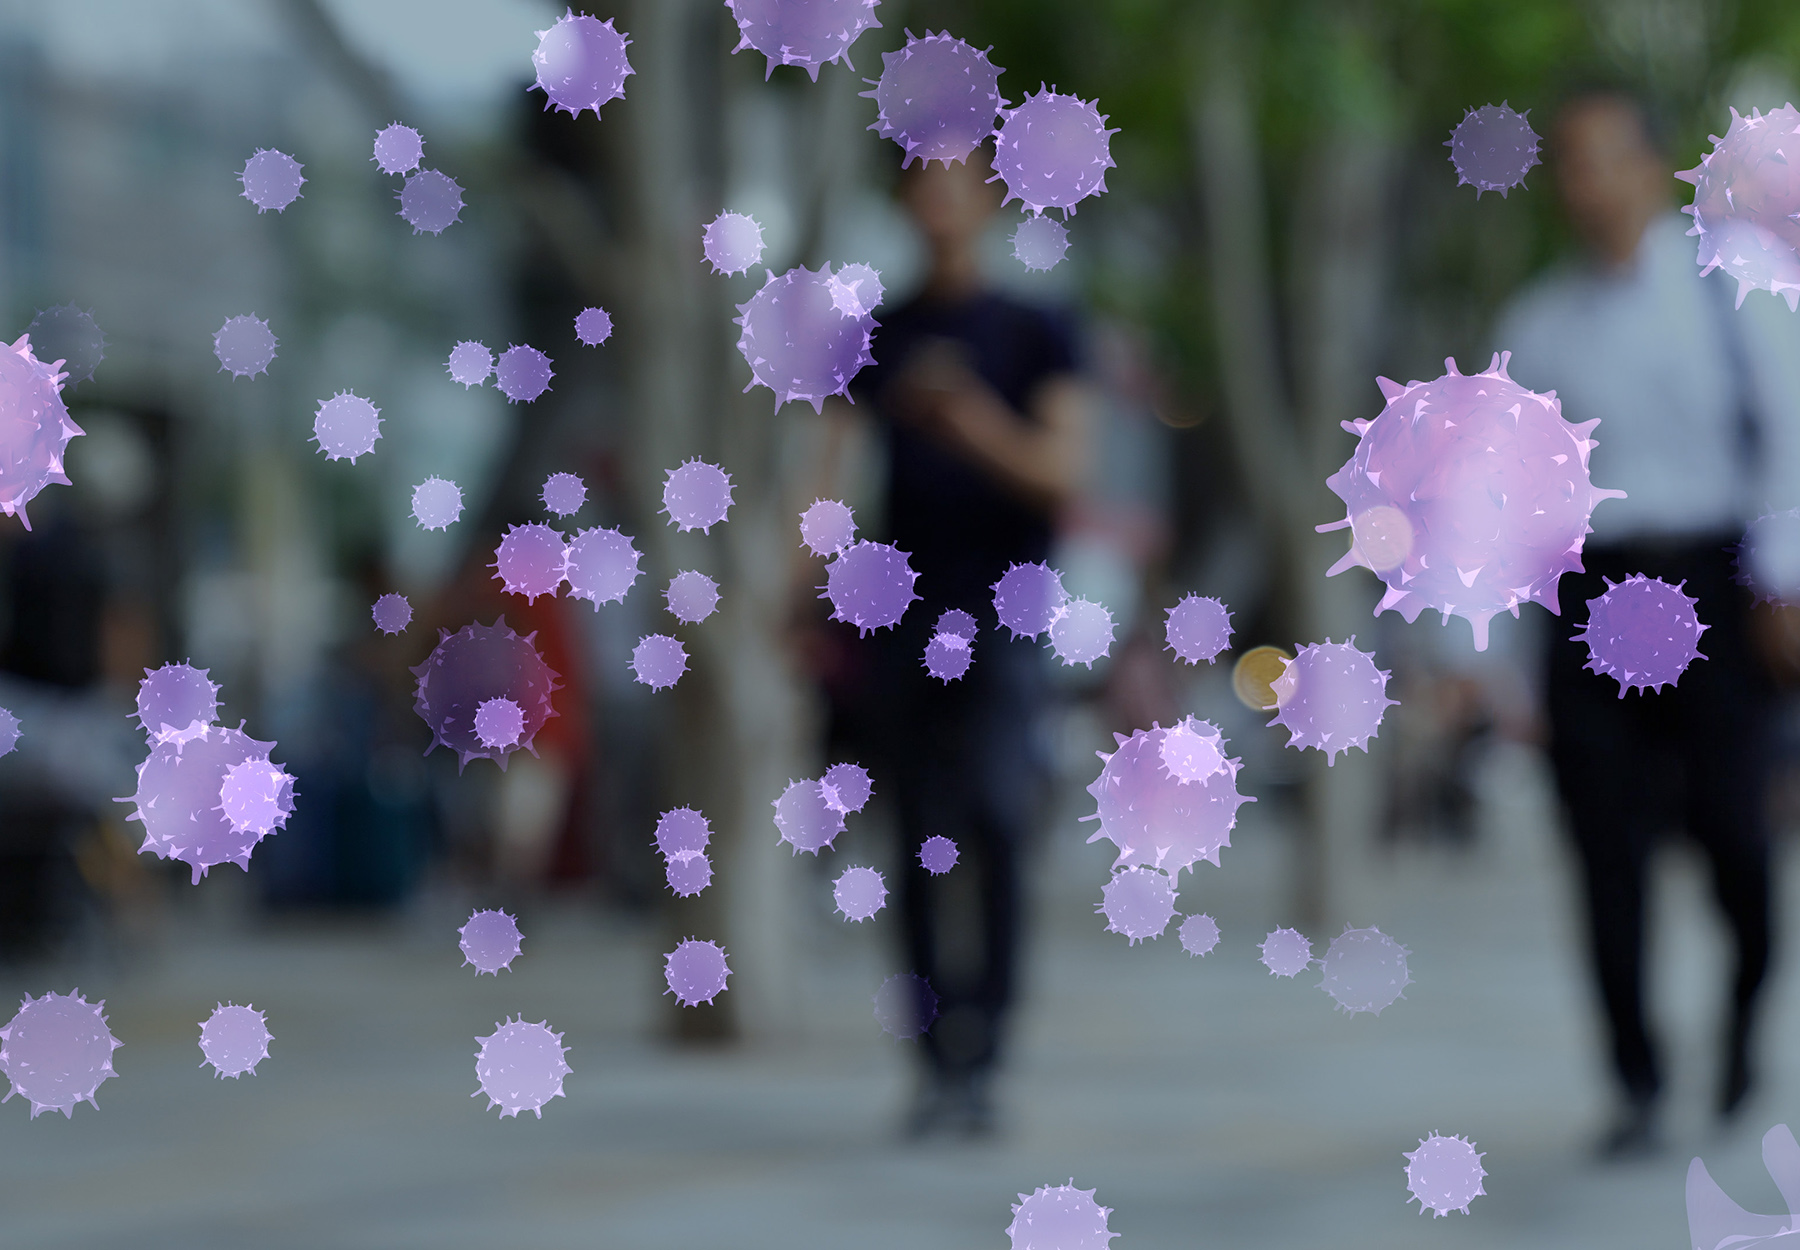 Stock photo illustration of blurred image of people walking along a city street with purple virus particles around them to represent infectious diseases